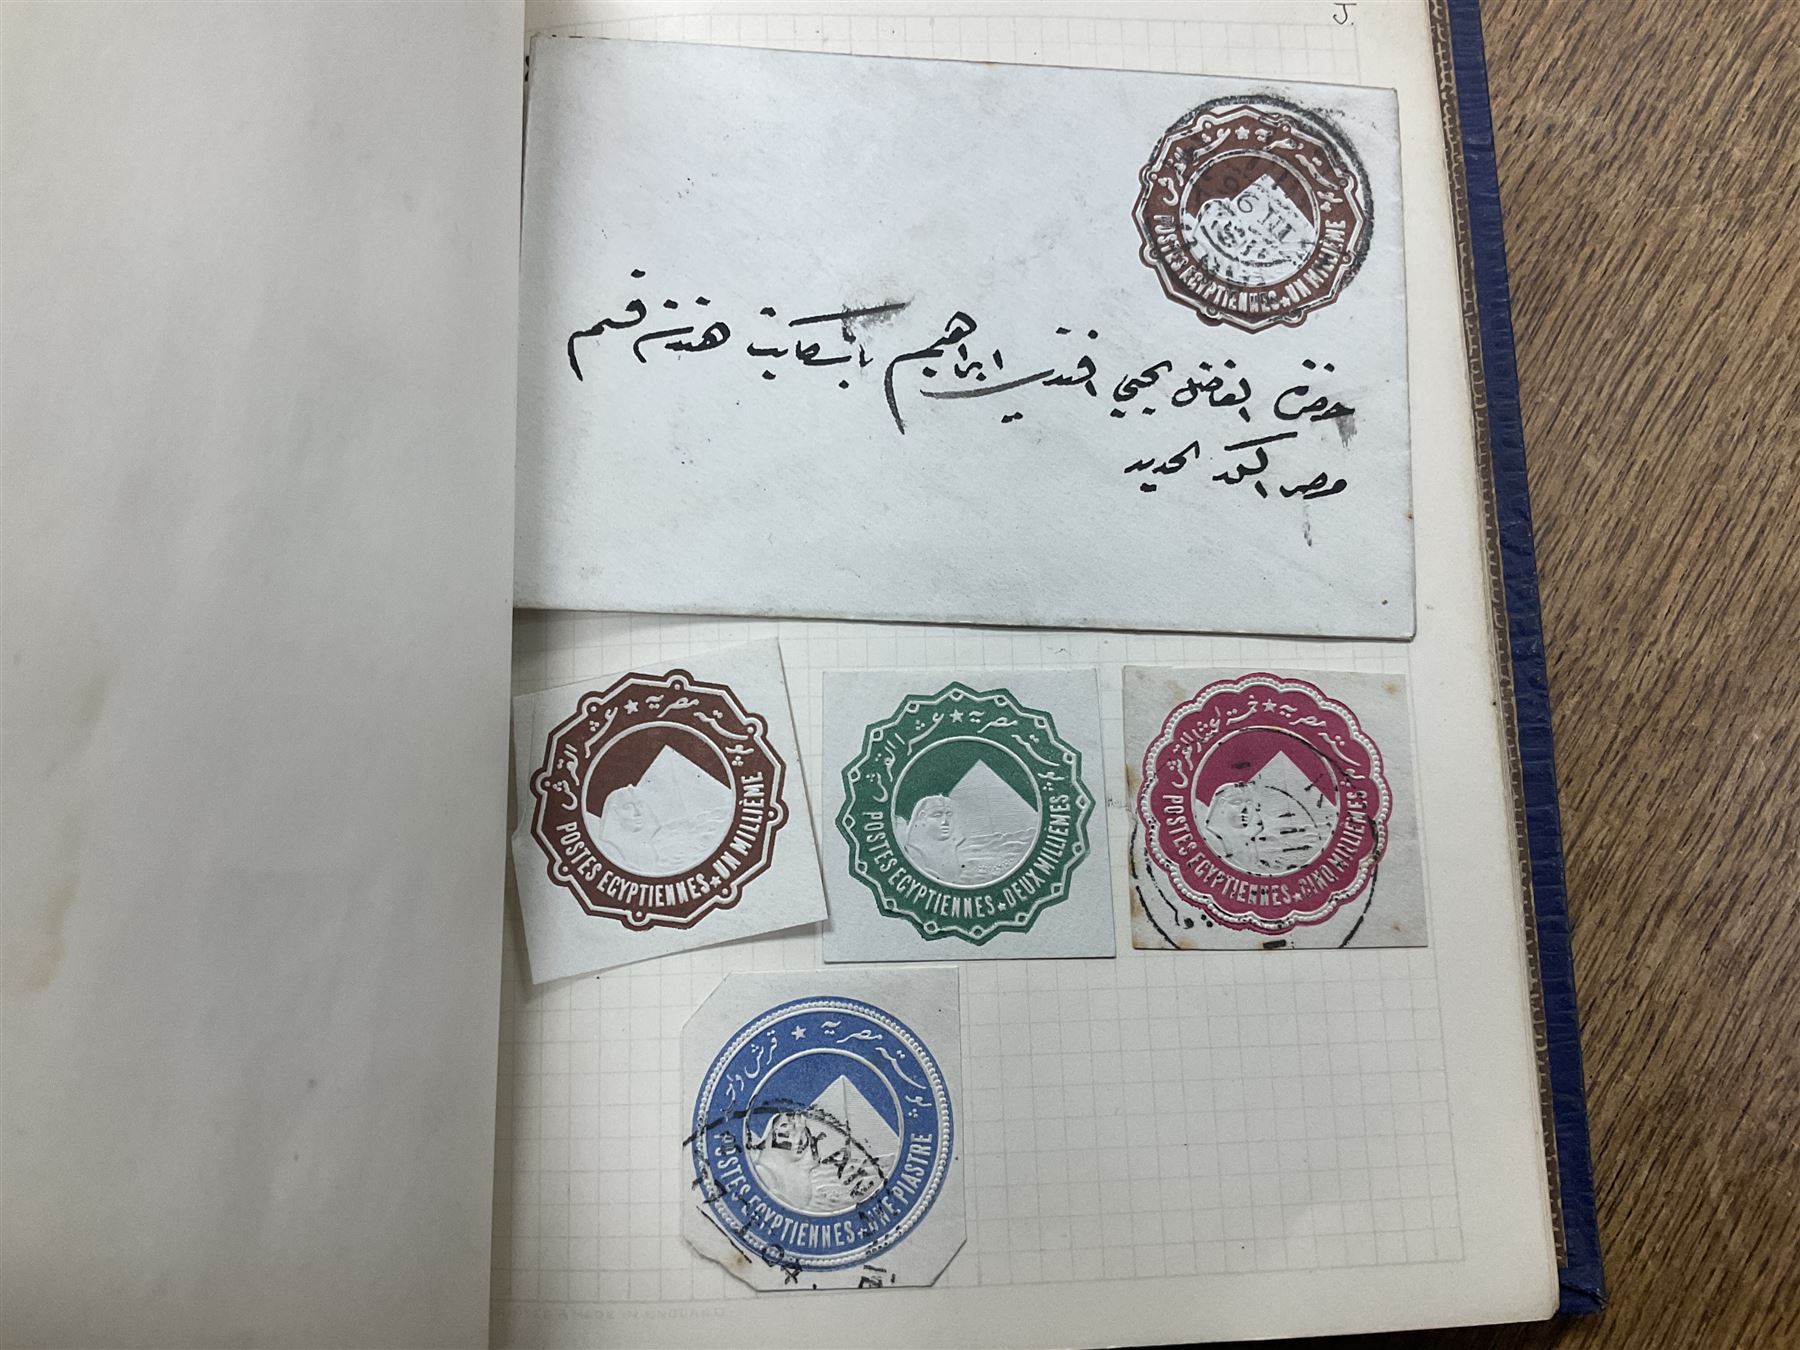 Egypt 1866 and later stamps - Image 550 of 761